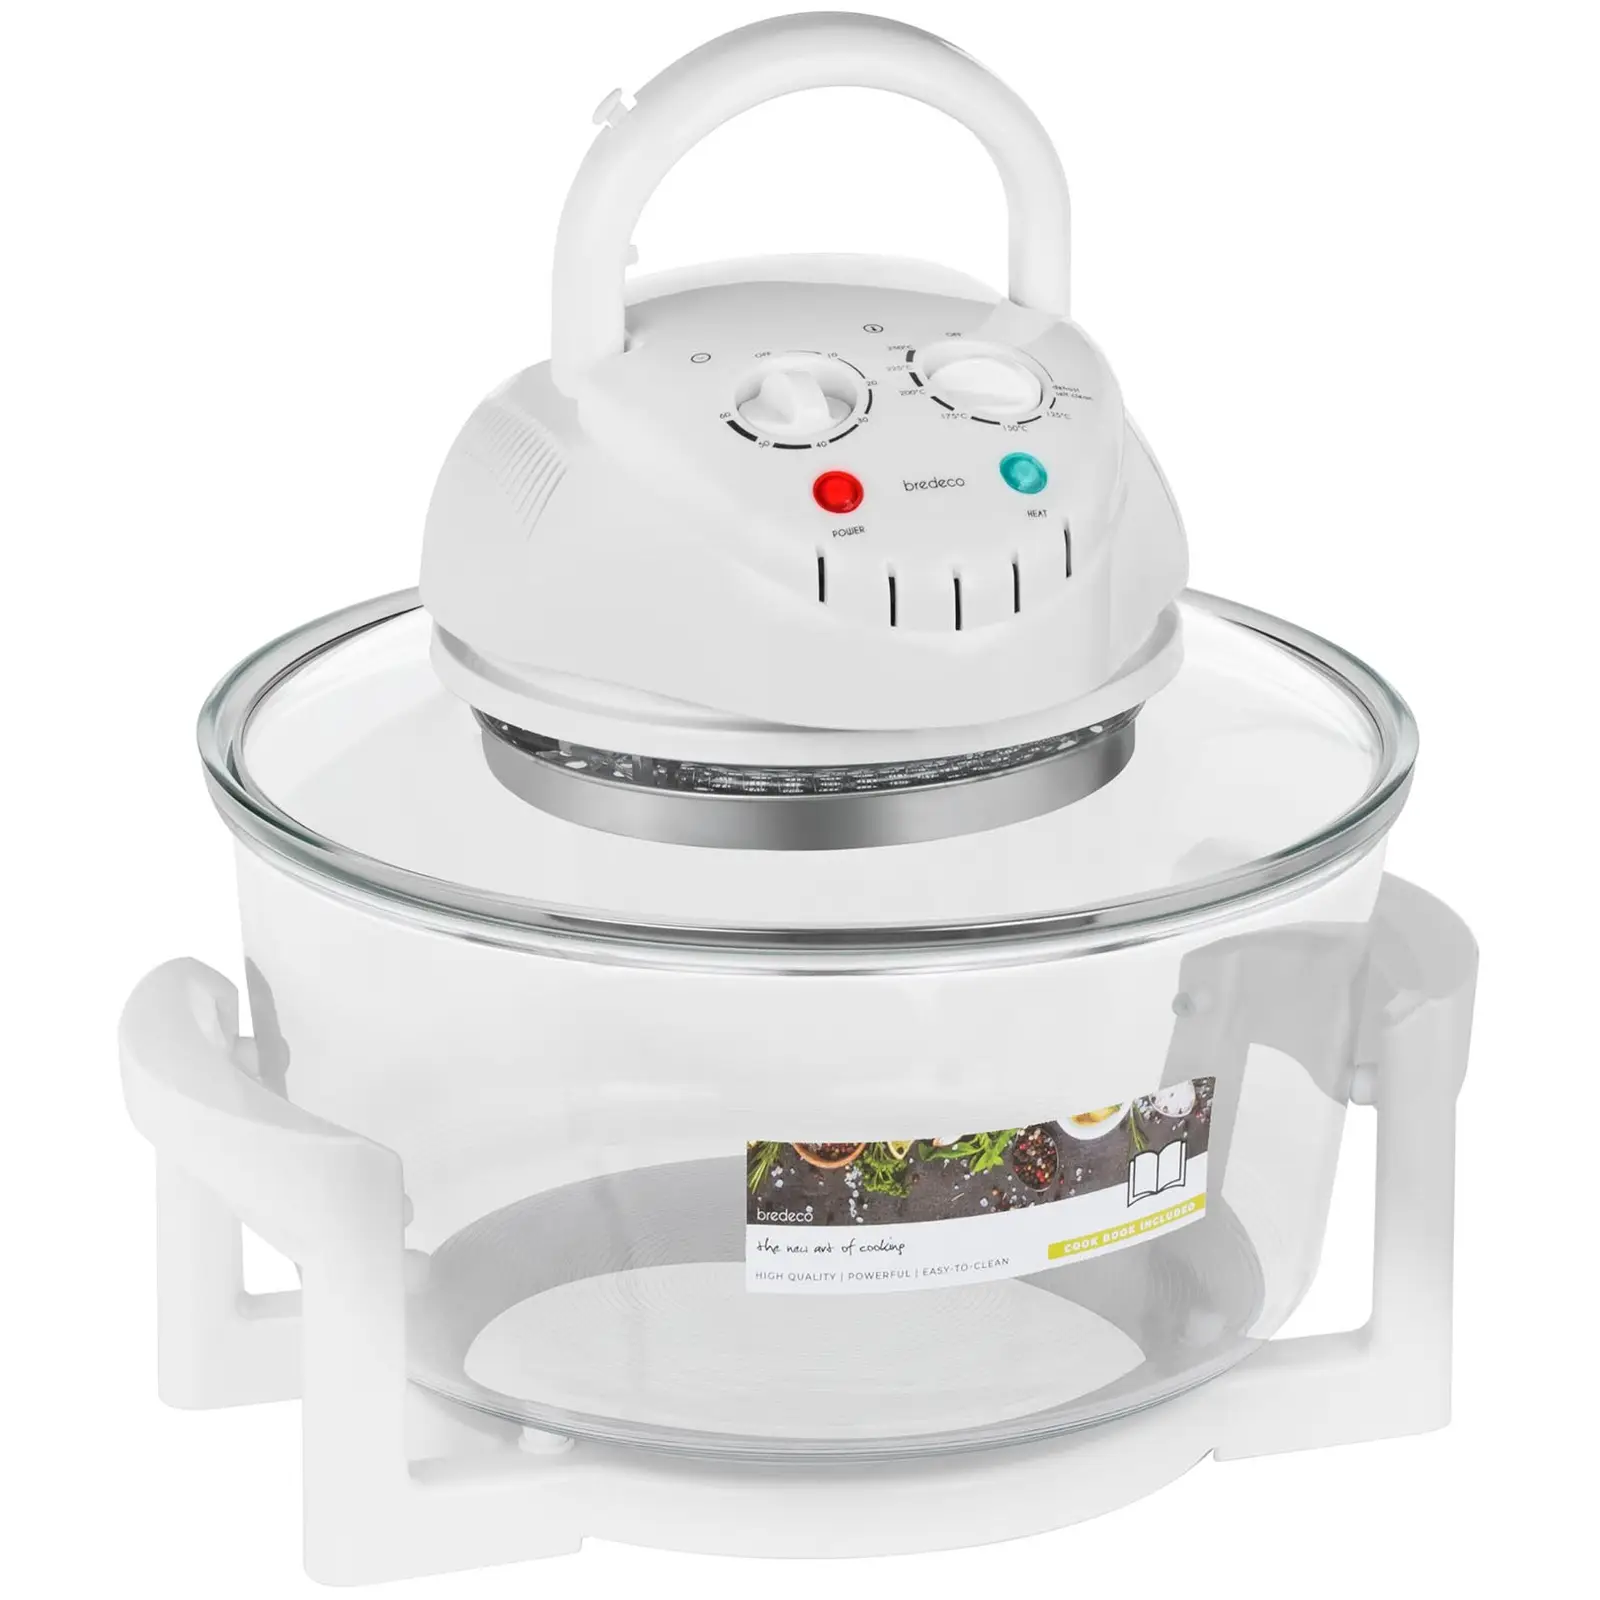 Halogen Oven Cooker with Extender Ring - 250 °C - 60 min